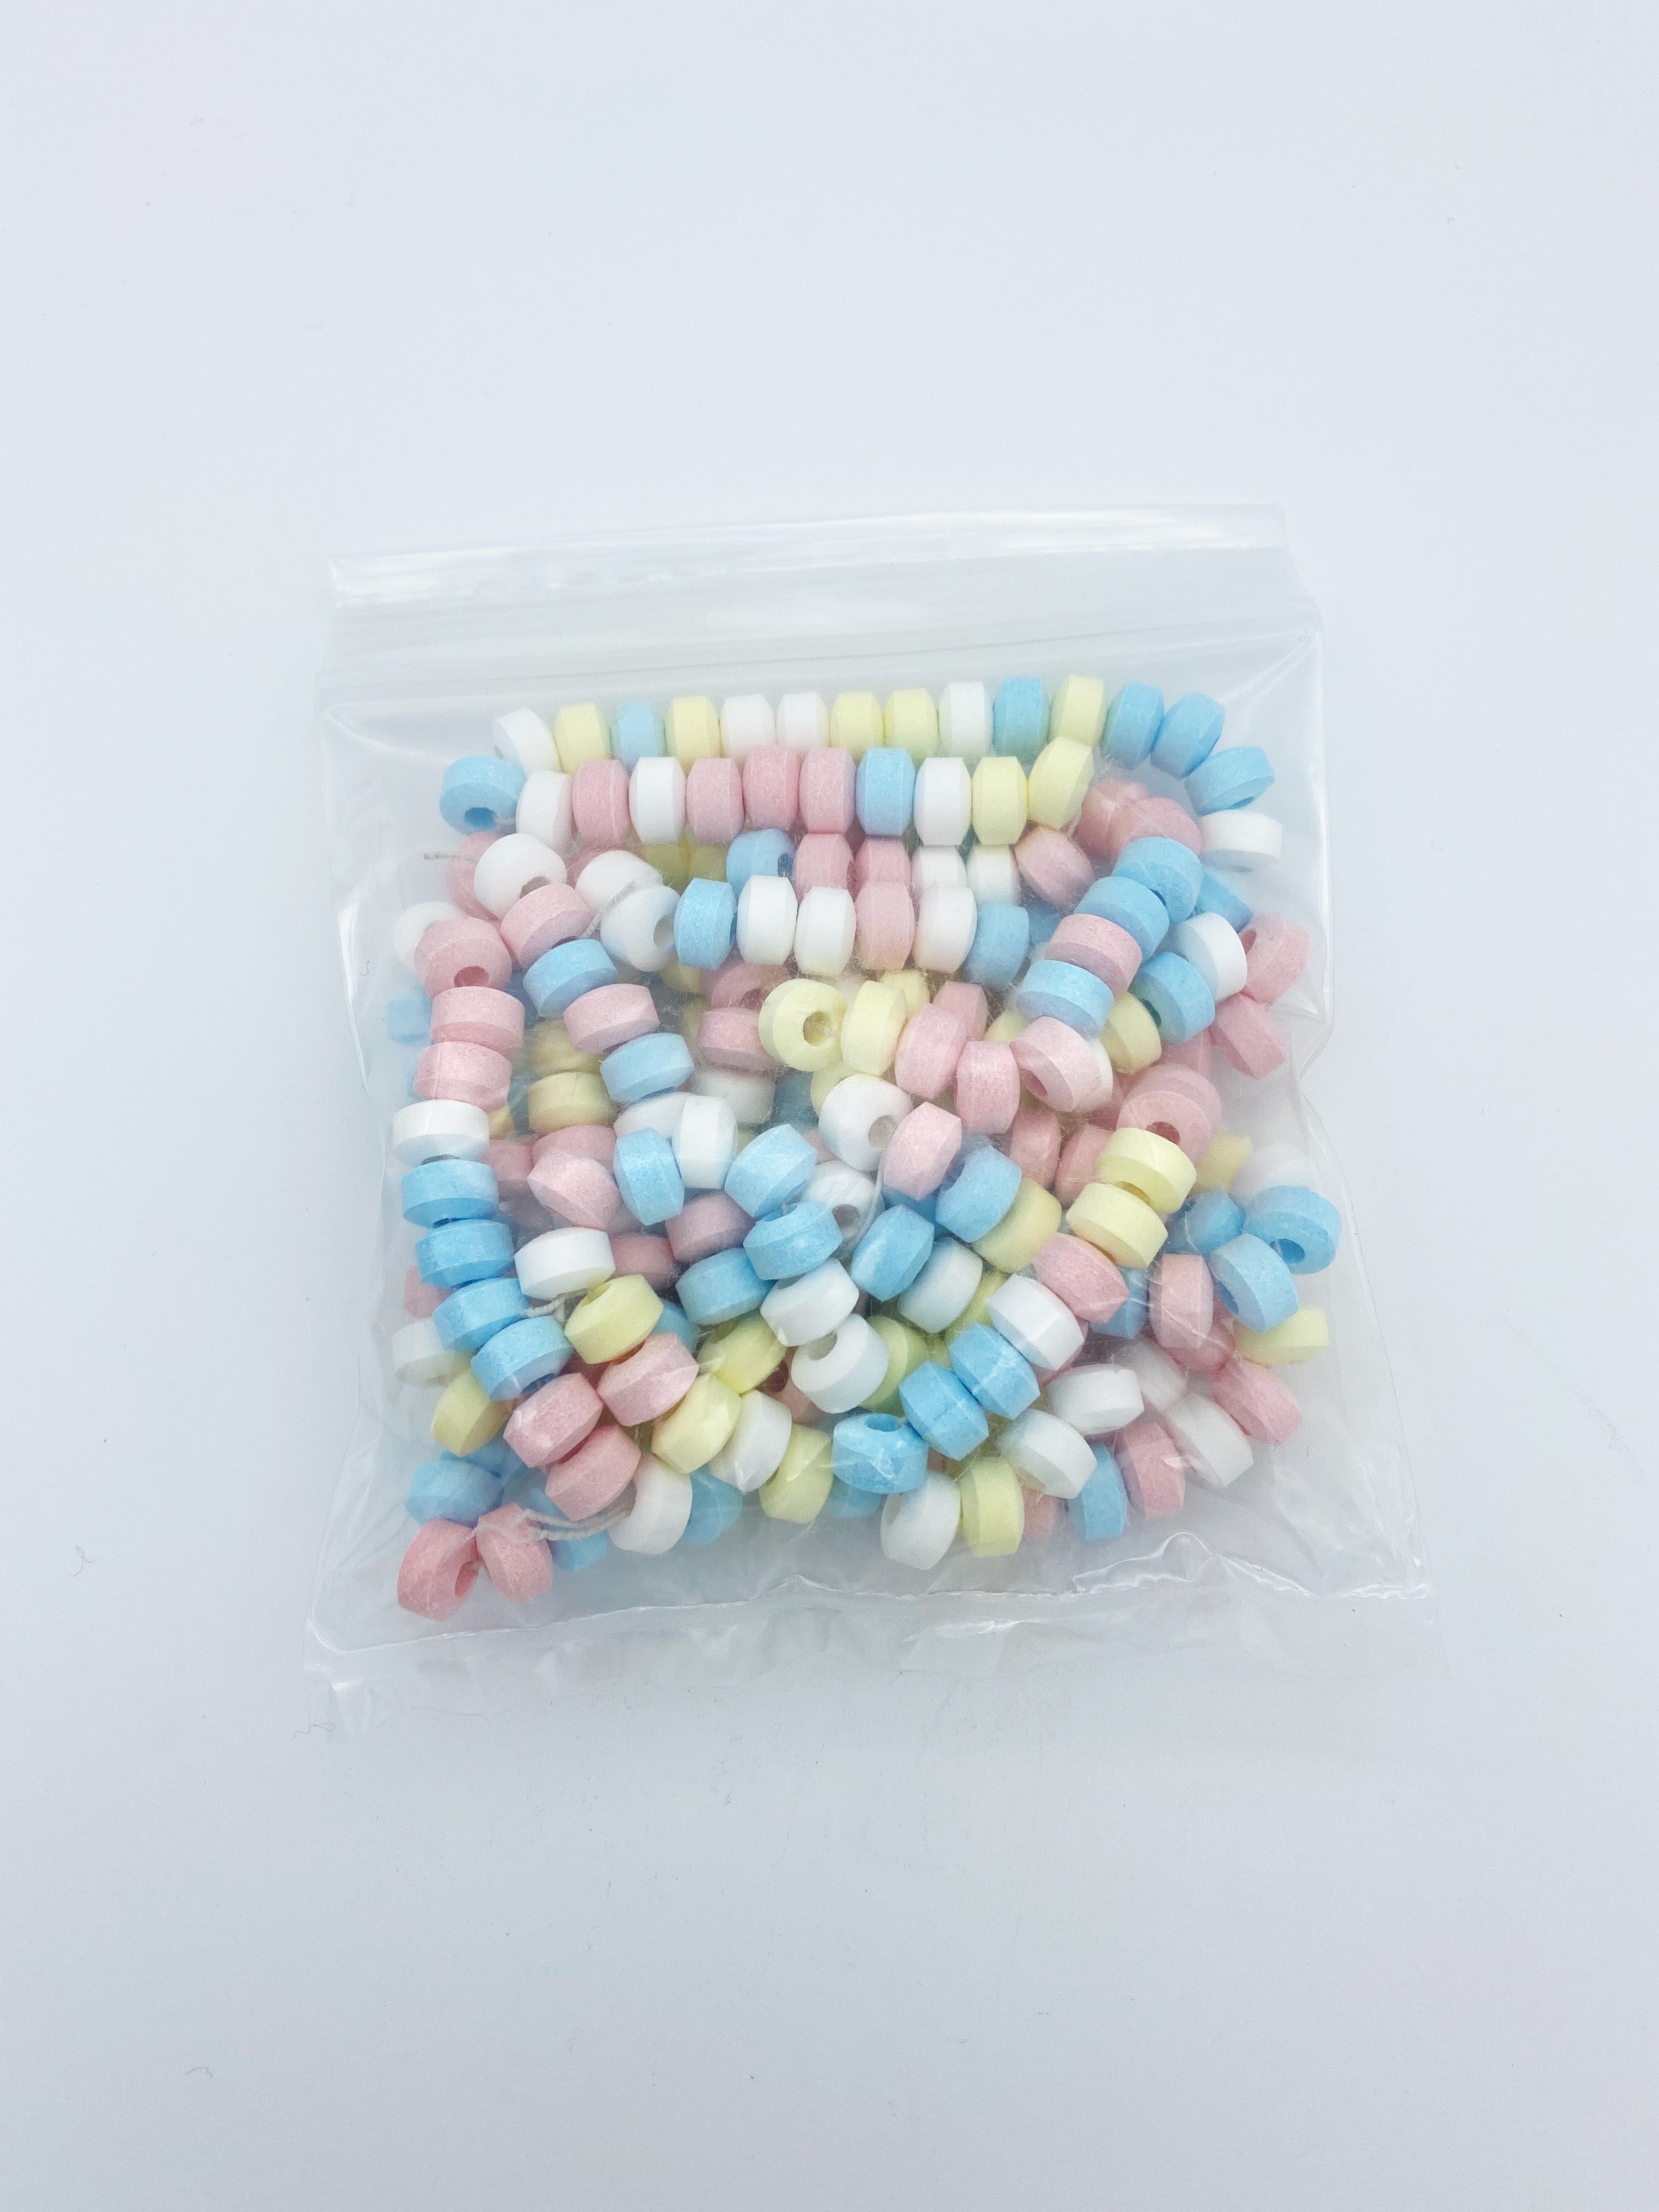 CANDY NECKLACES - Medium Bags